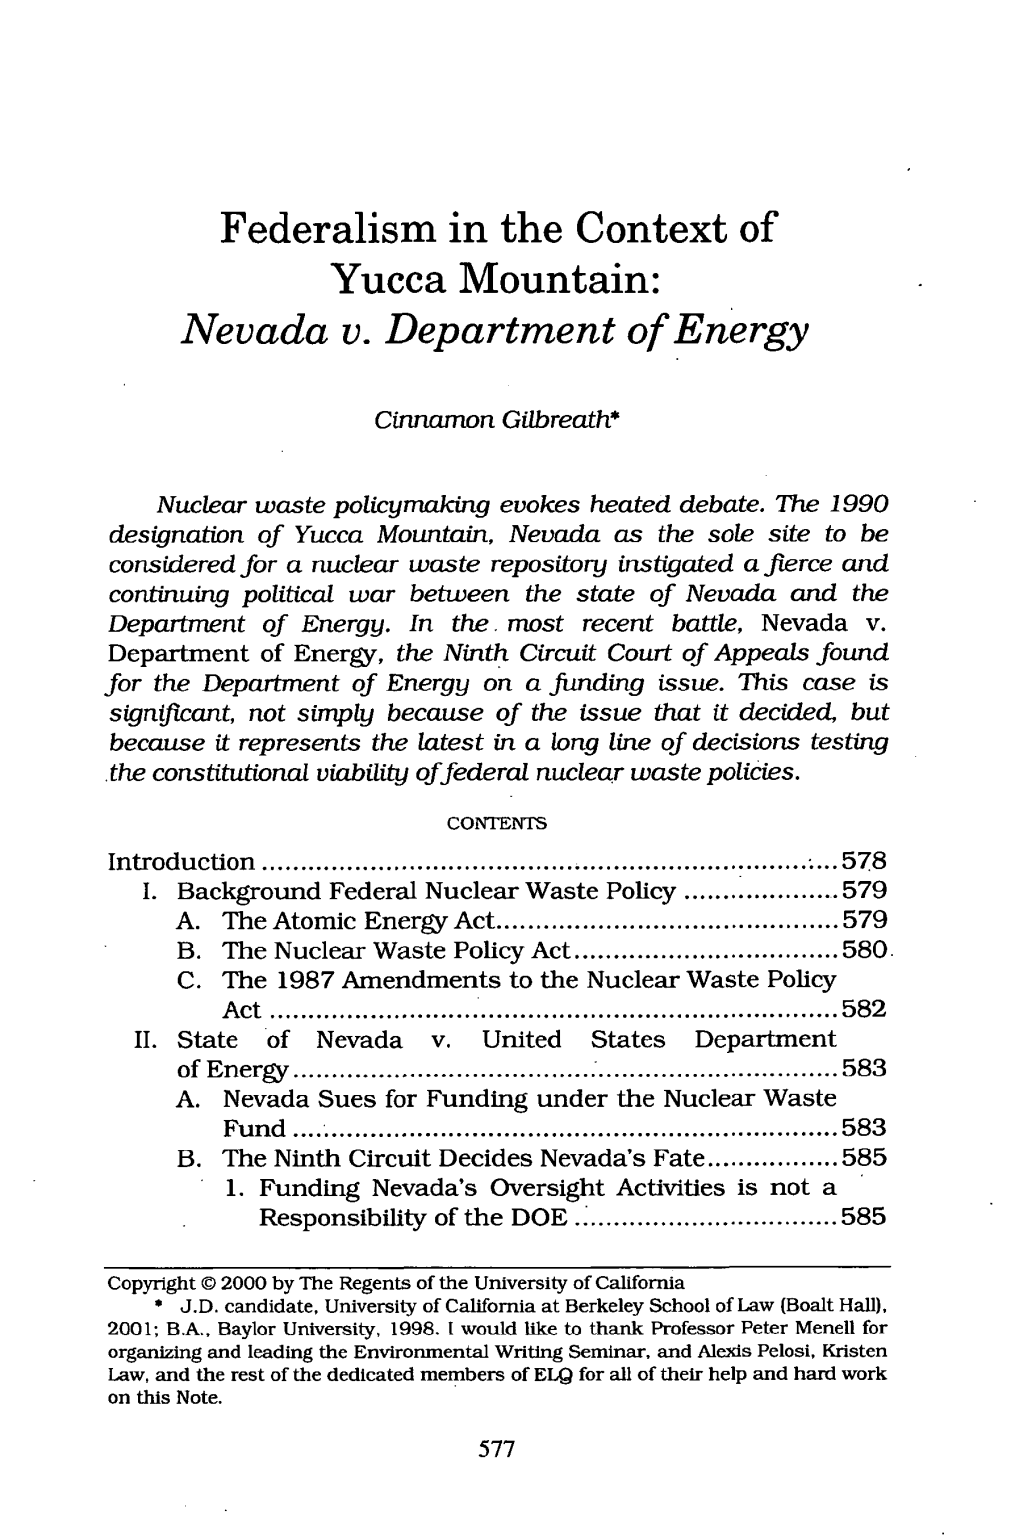 Federalism in the Context of Yucca Mountain: Nevada V. Department of Energy